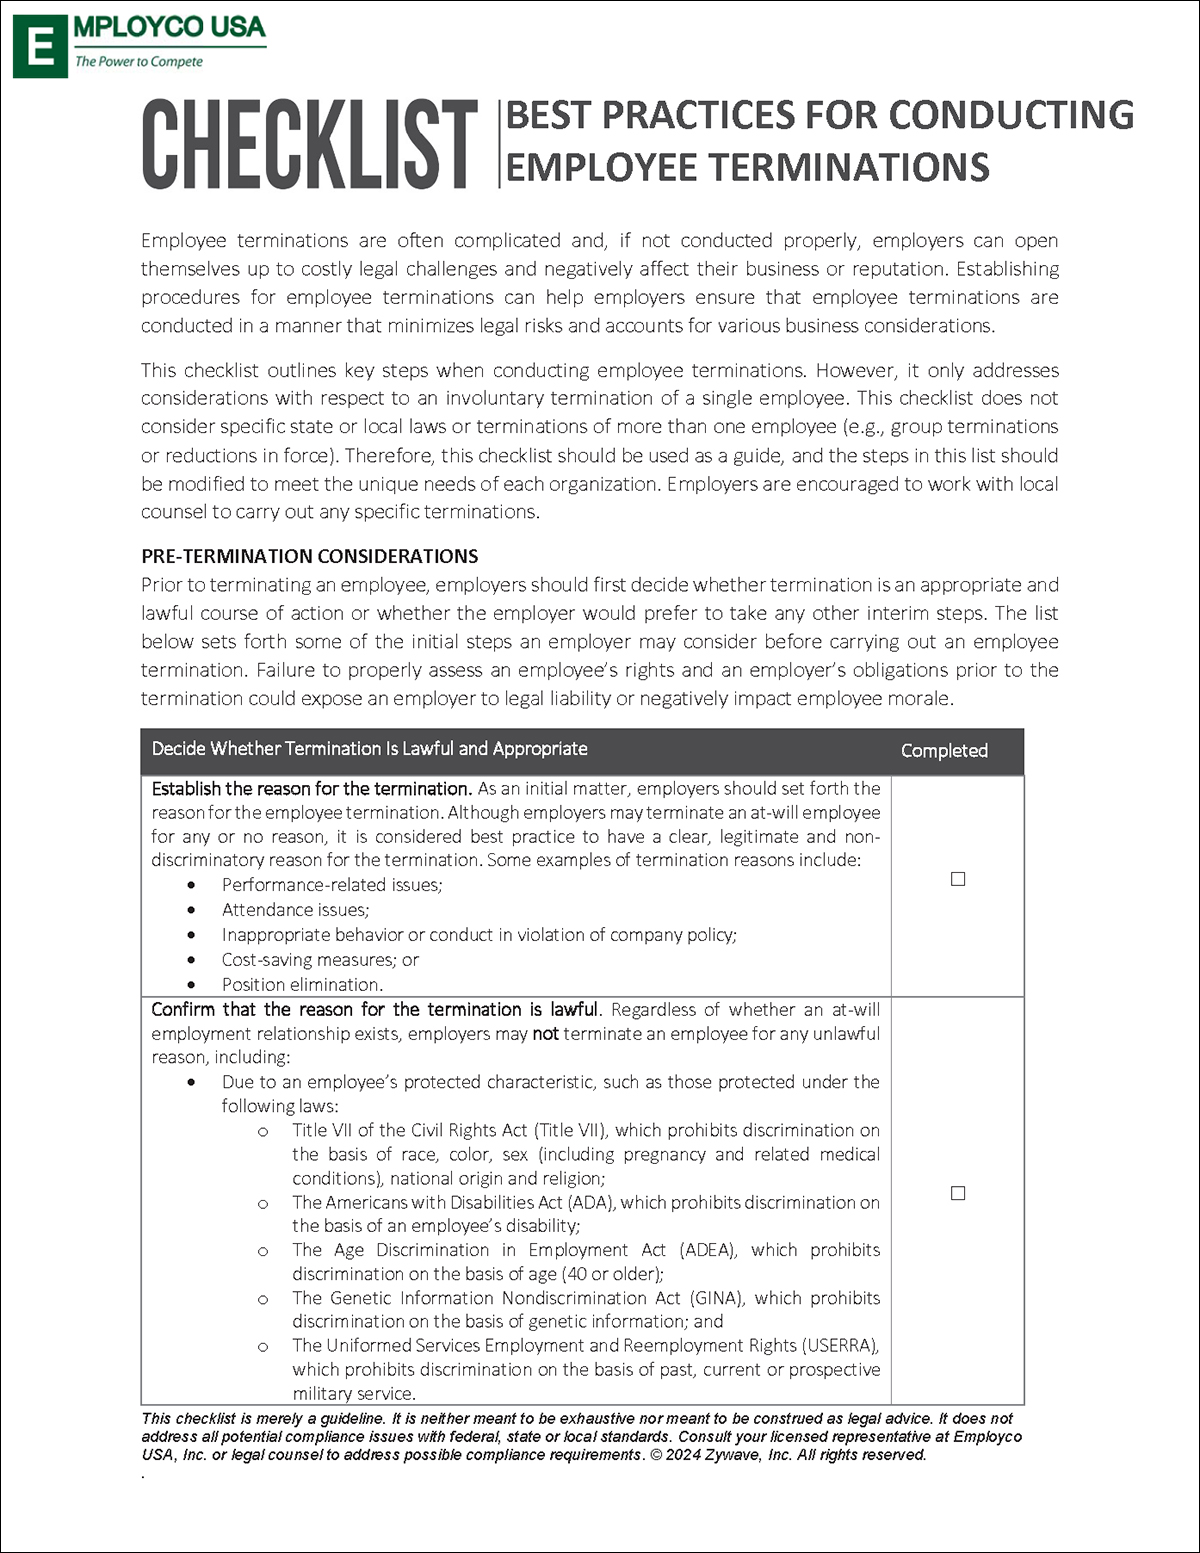 Checklist for Conducting Employee Terminations